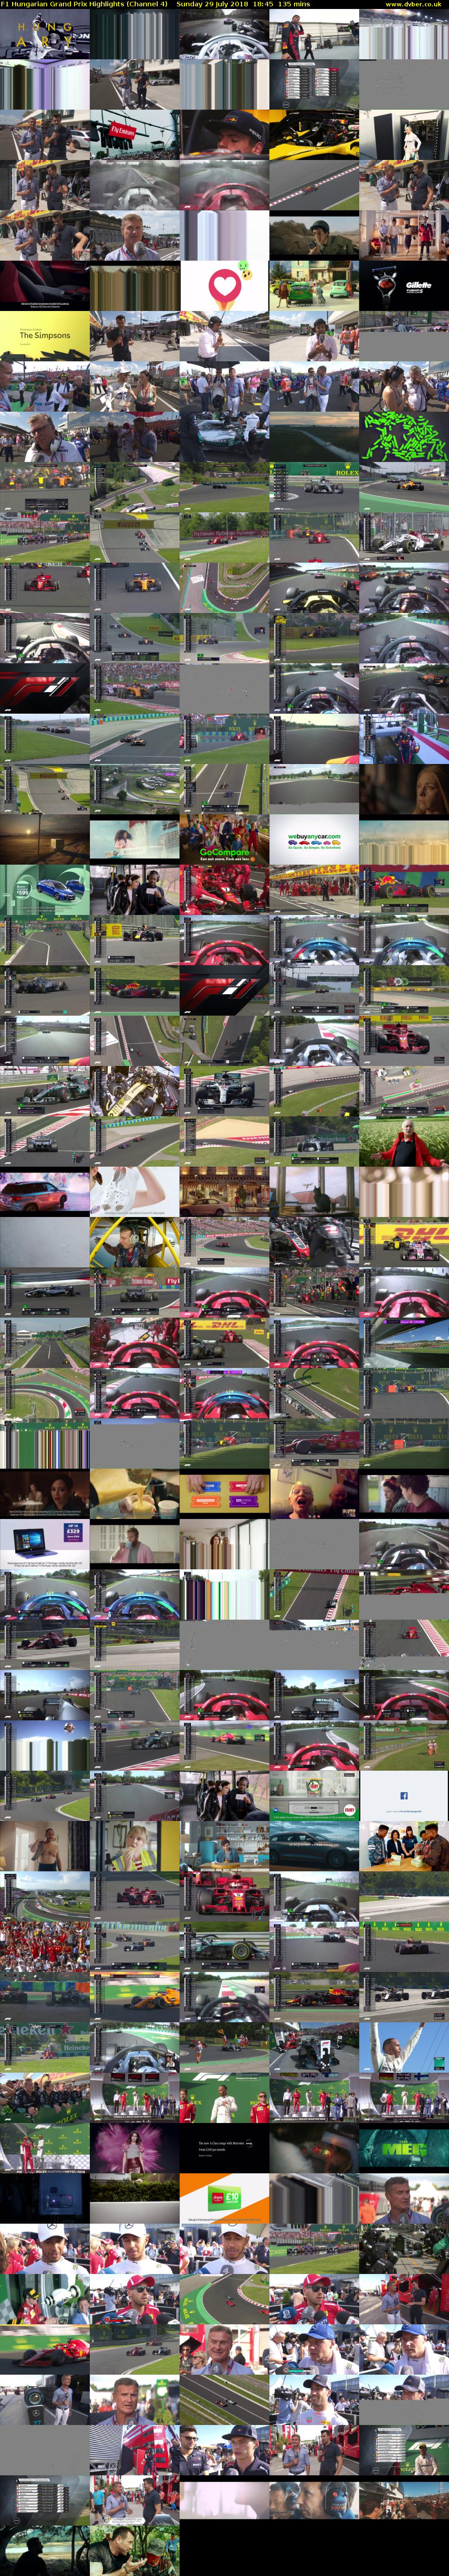 F1 Hungarian Grand Prix Highlights (Channel 4) Sunday 29 July 2018 18:45 - 21:00